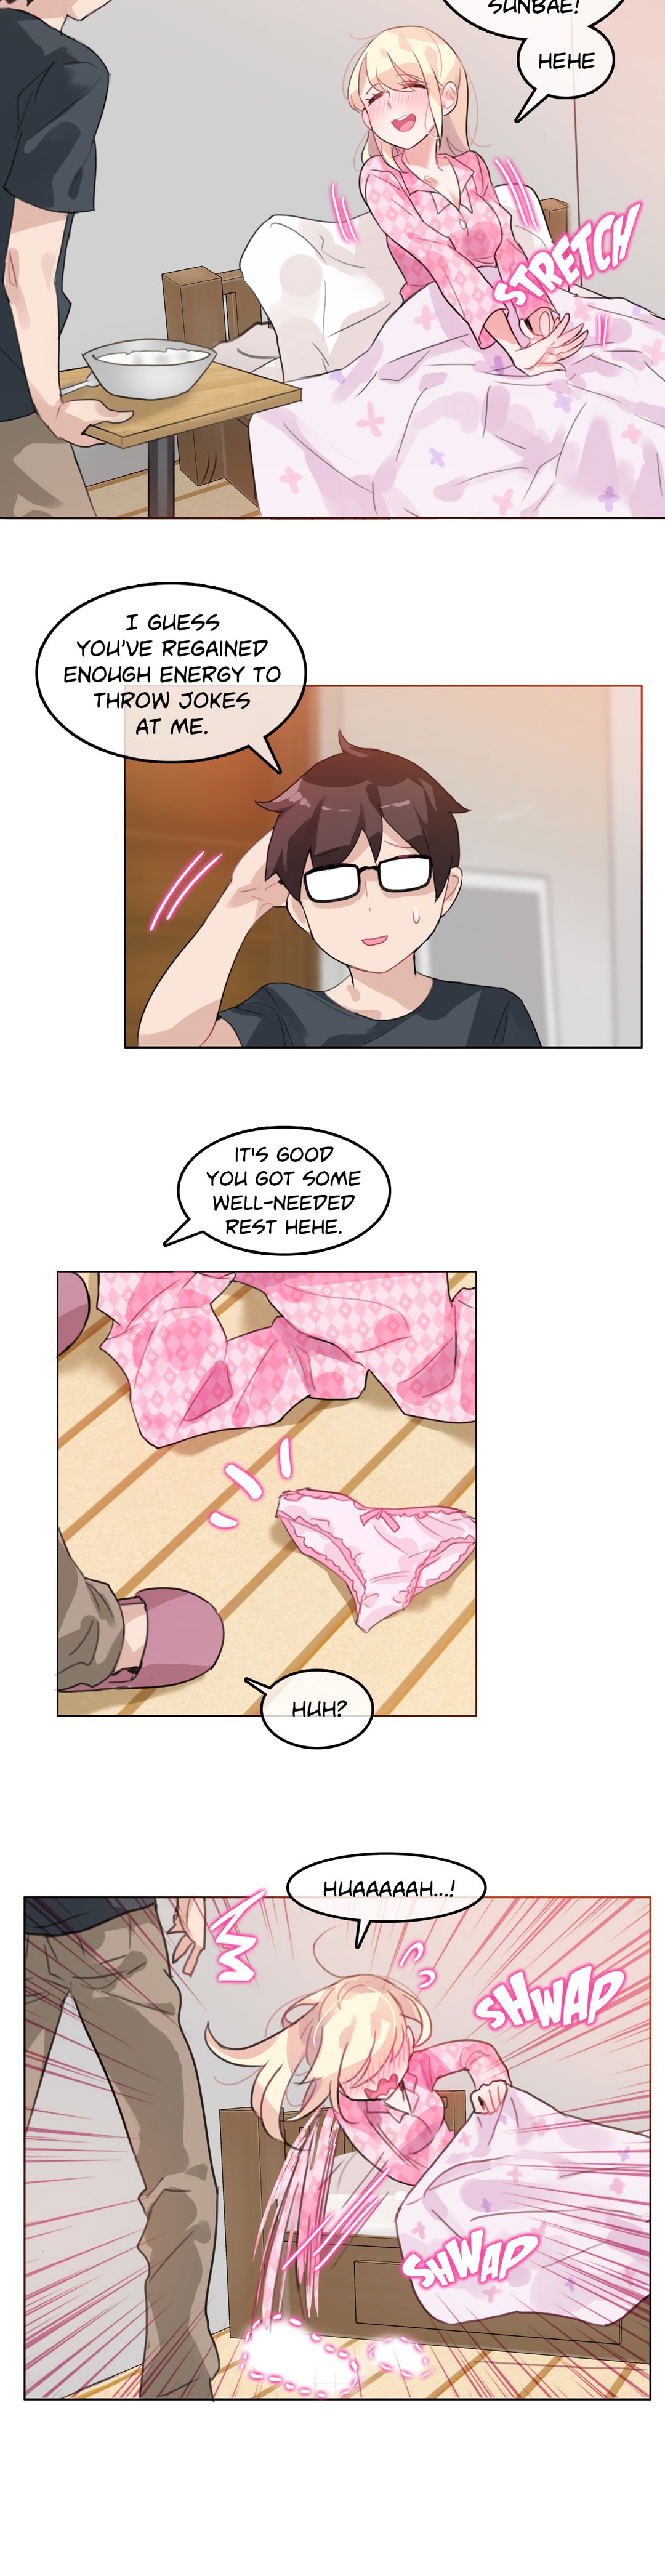 A Pervert's Daily Life Ch.15